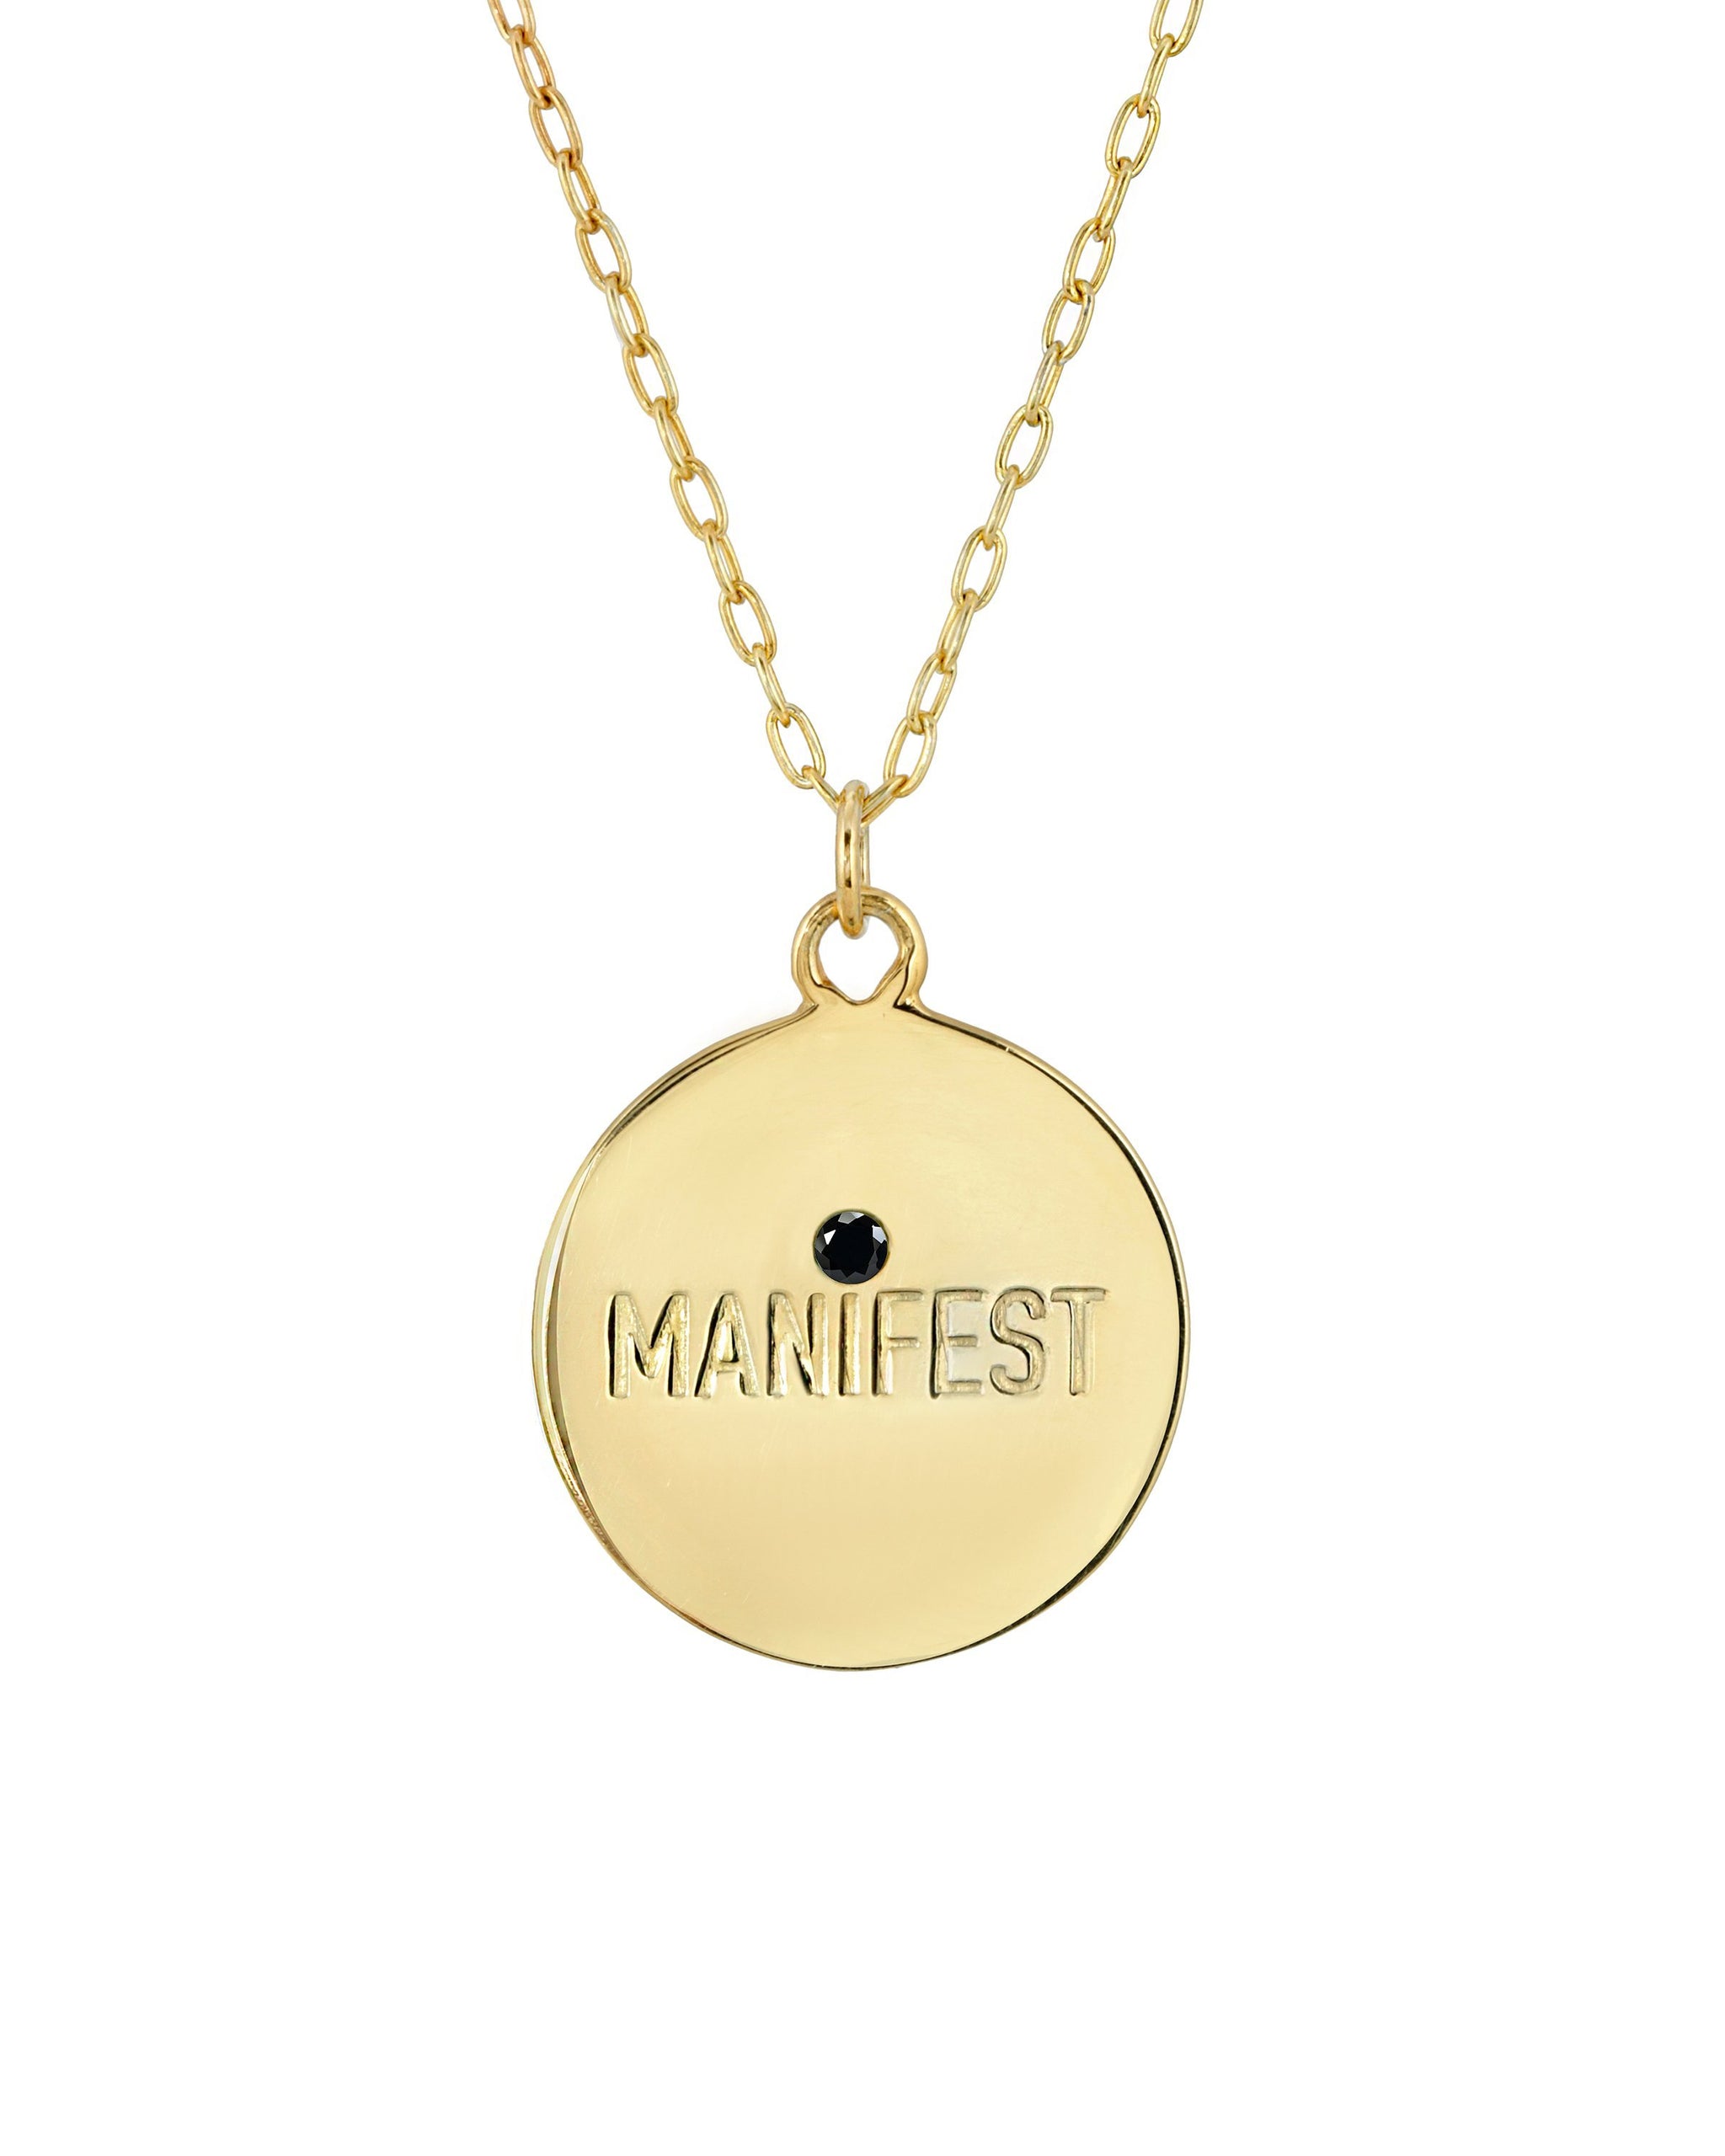 Manifest Necklace, Gold Vermeil Round Medallion with Manifest engraved and a 2mm semi precious stone. Handmade by Turquoise + Tobacco in Los Angeles, California